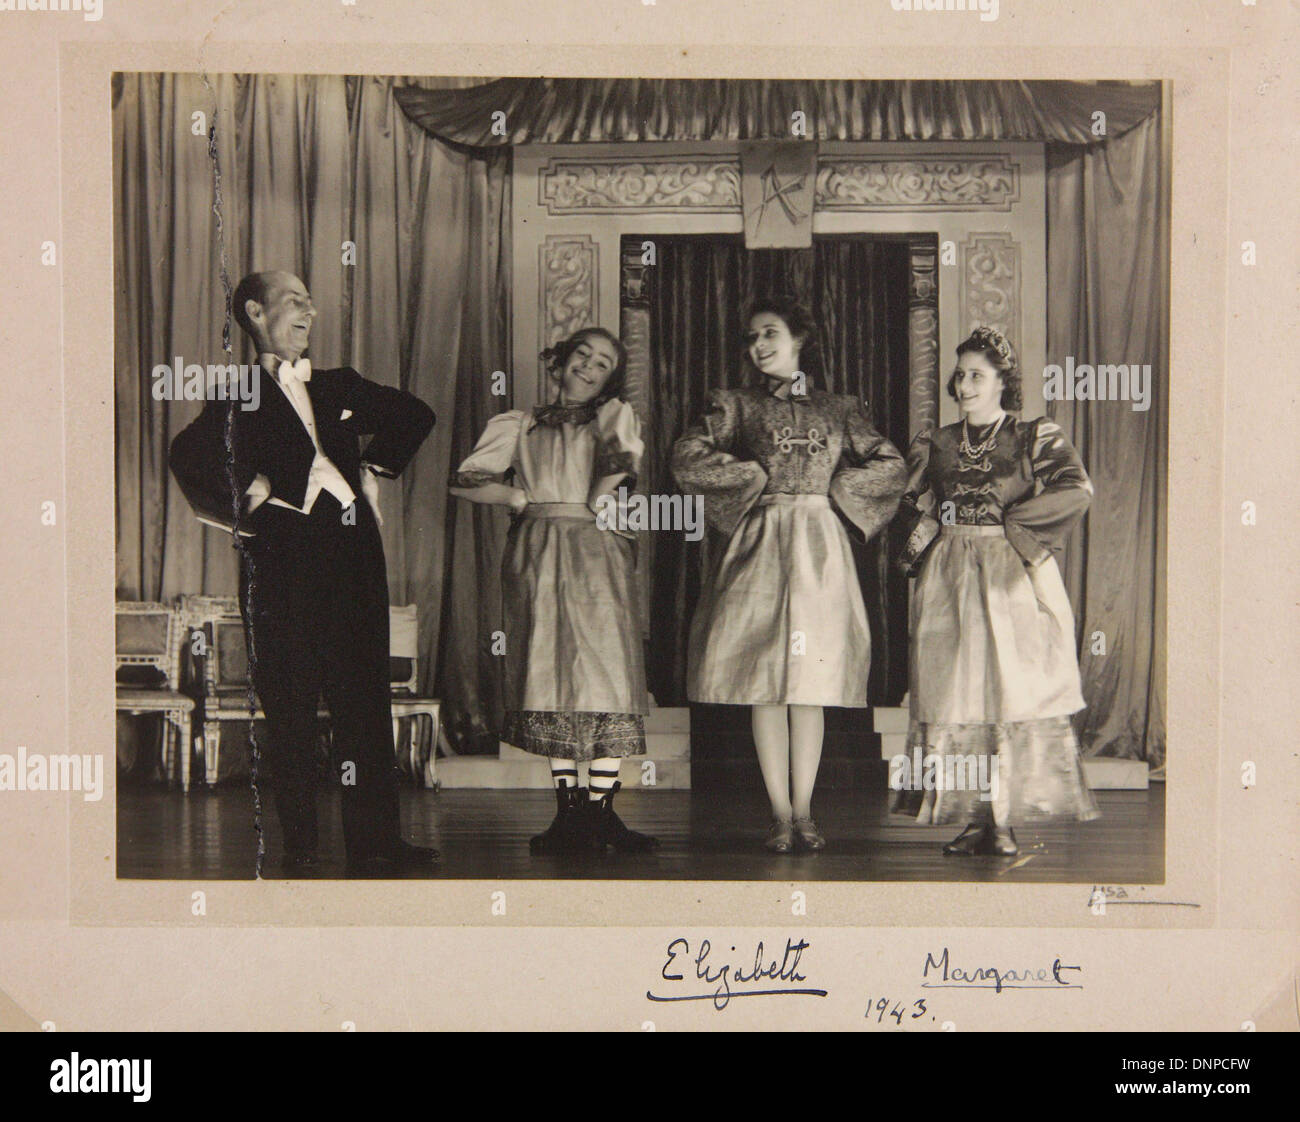 A signed photograph of Princess Margaret (right) and Princess Elizabeth (second from right) in the play Aladdin, 1943 Stock Photo